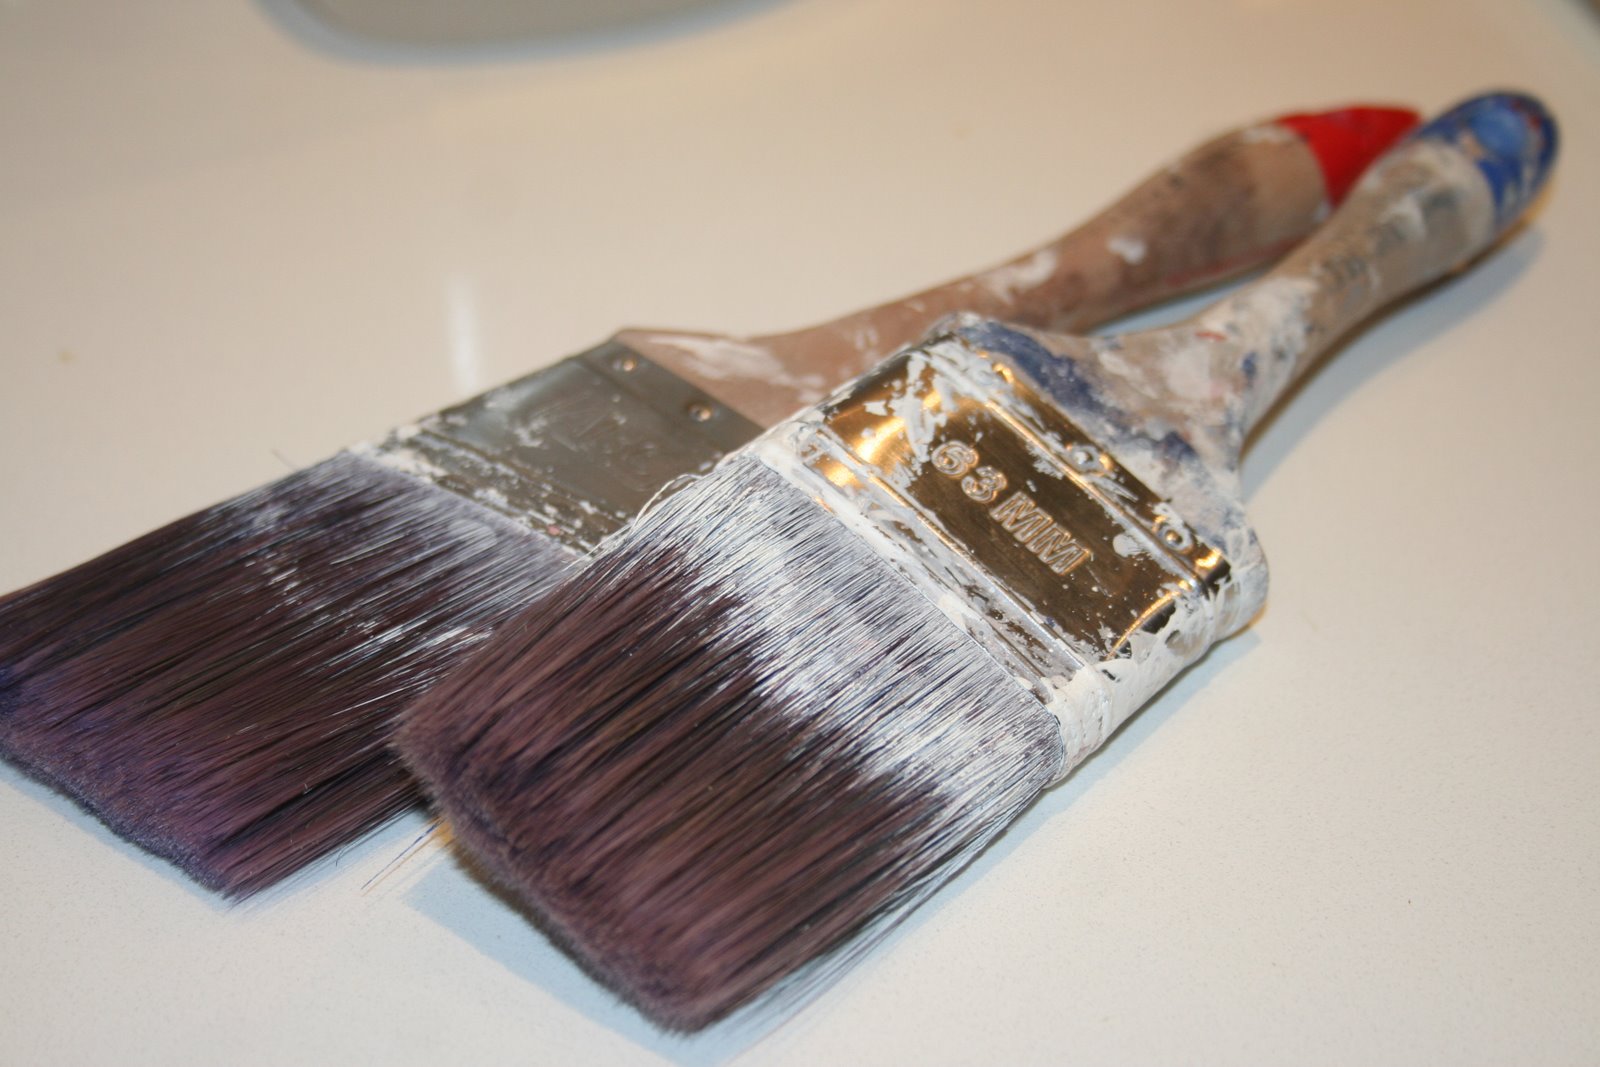 How to Take Care of, Protect and Restore Brushes: Make Your Natural and Synthetic Brushes Last Longer